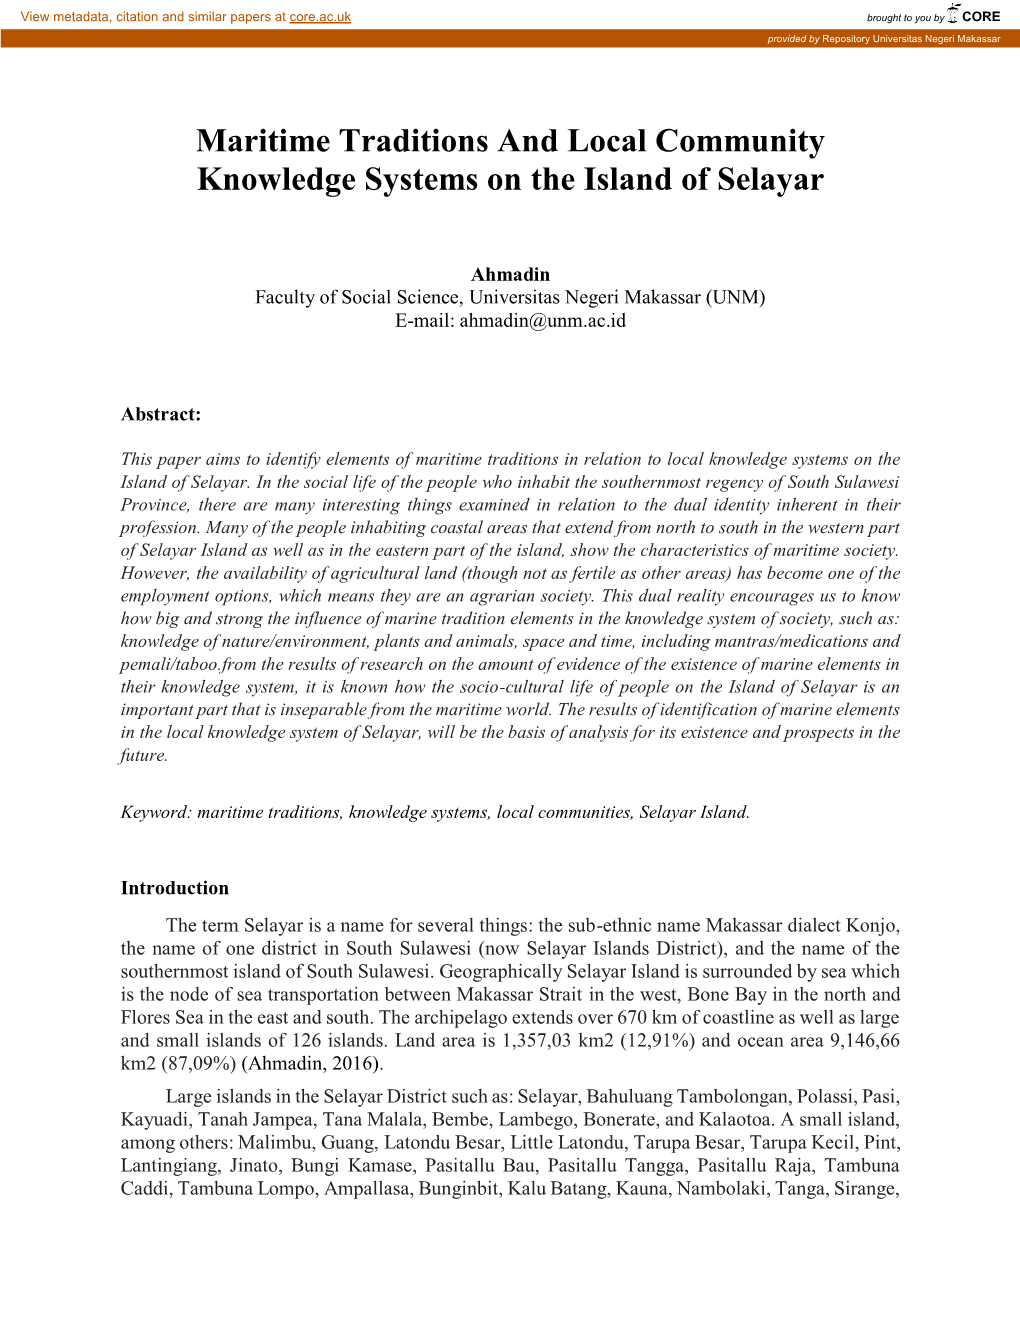 Maritime Traditions and Local Community Knowledge Systems on the Island of Selayar